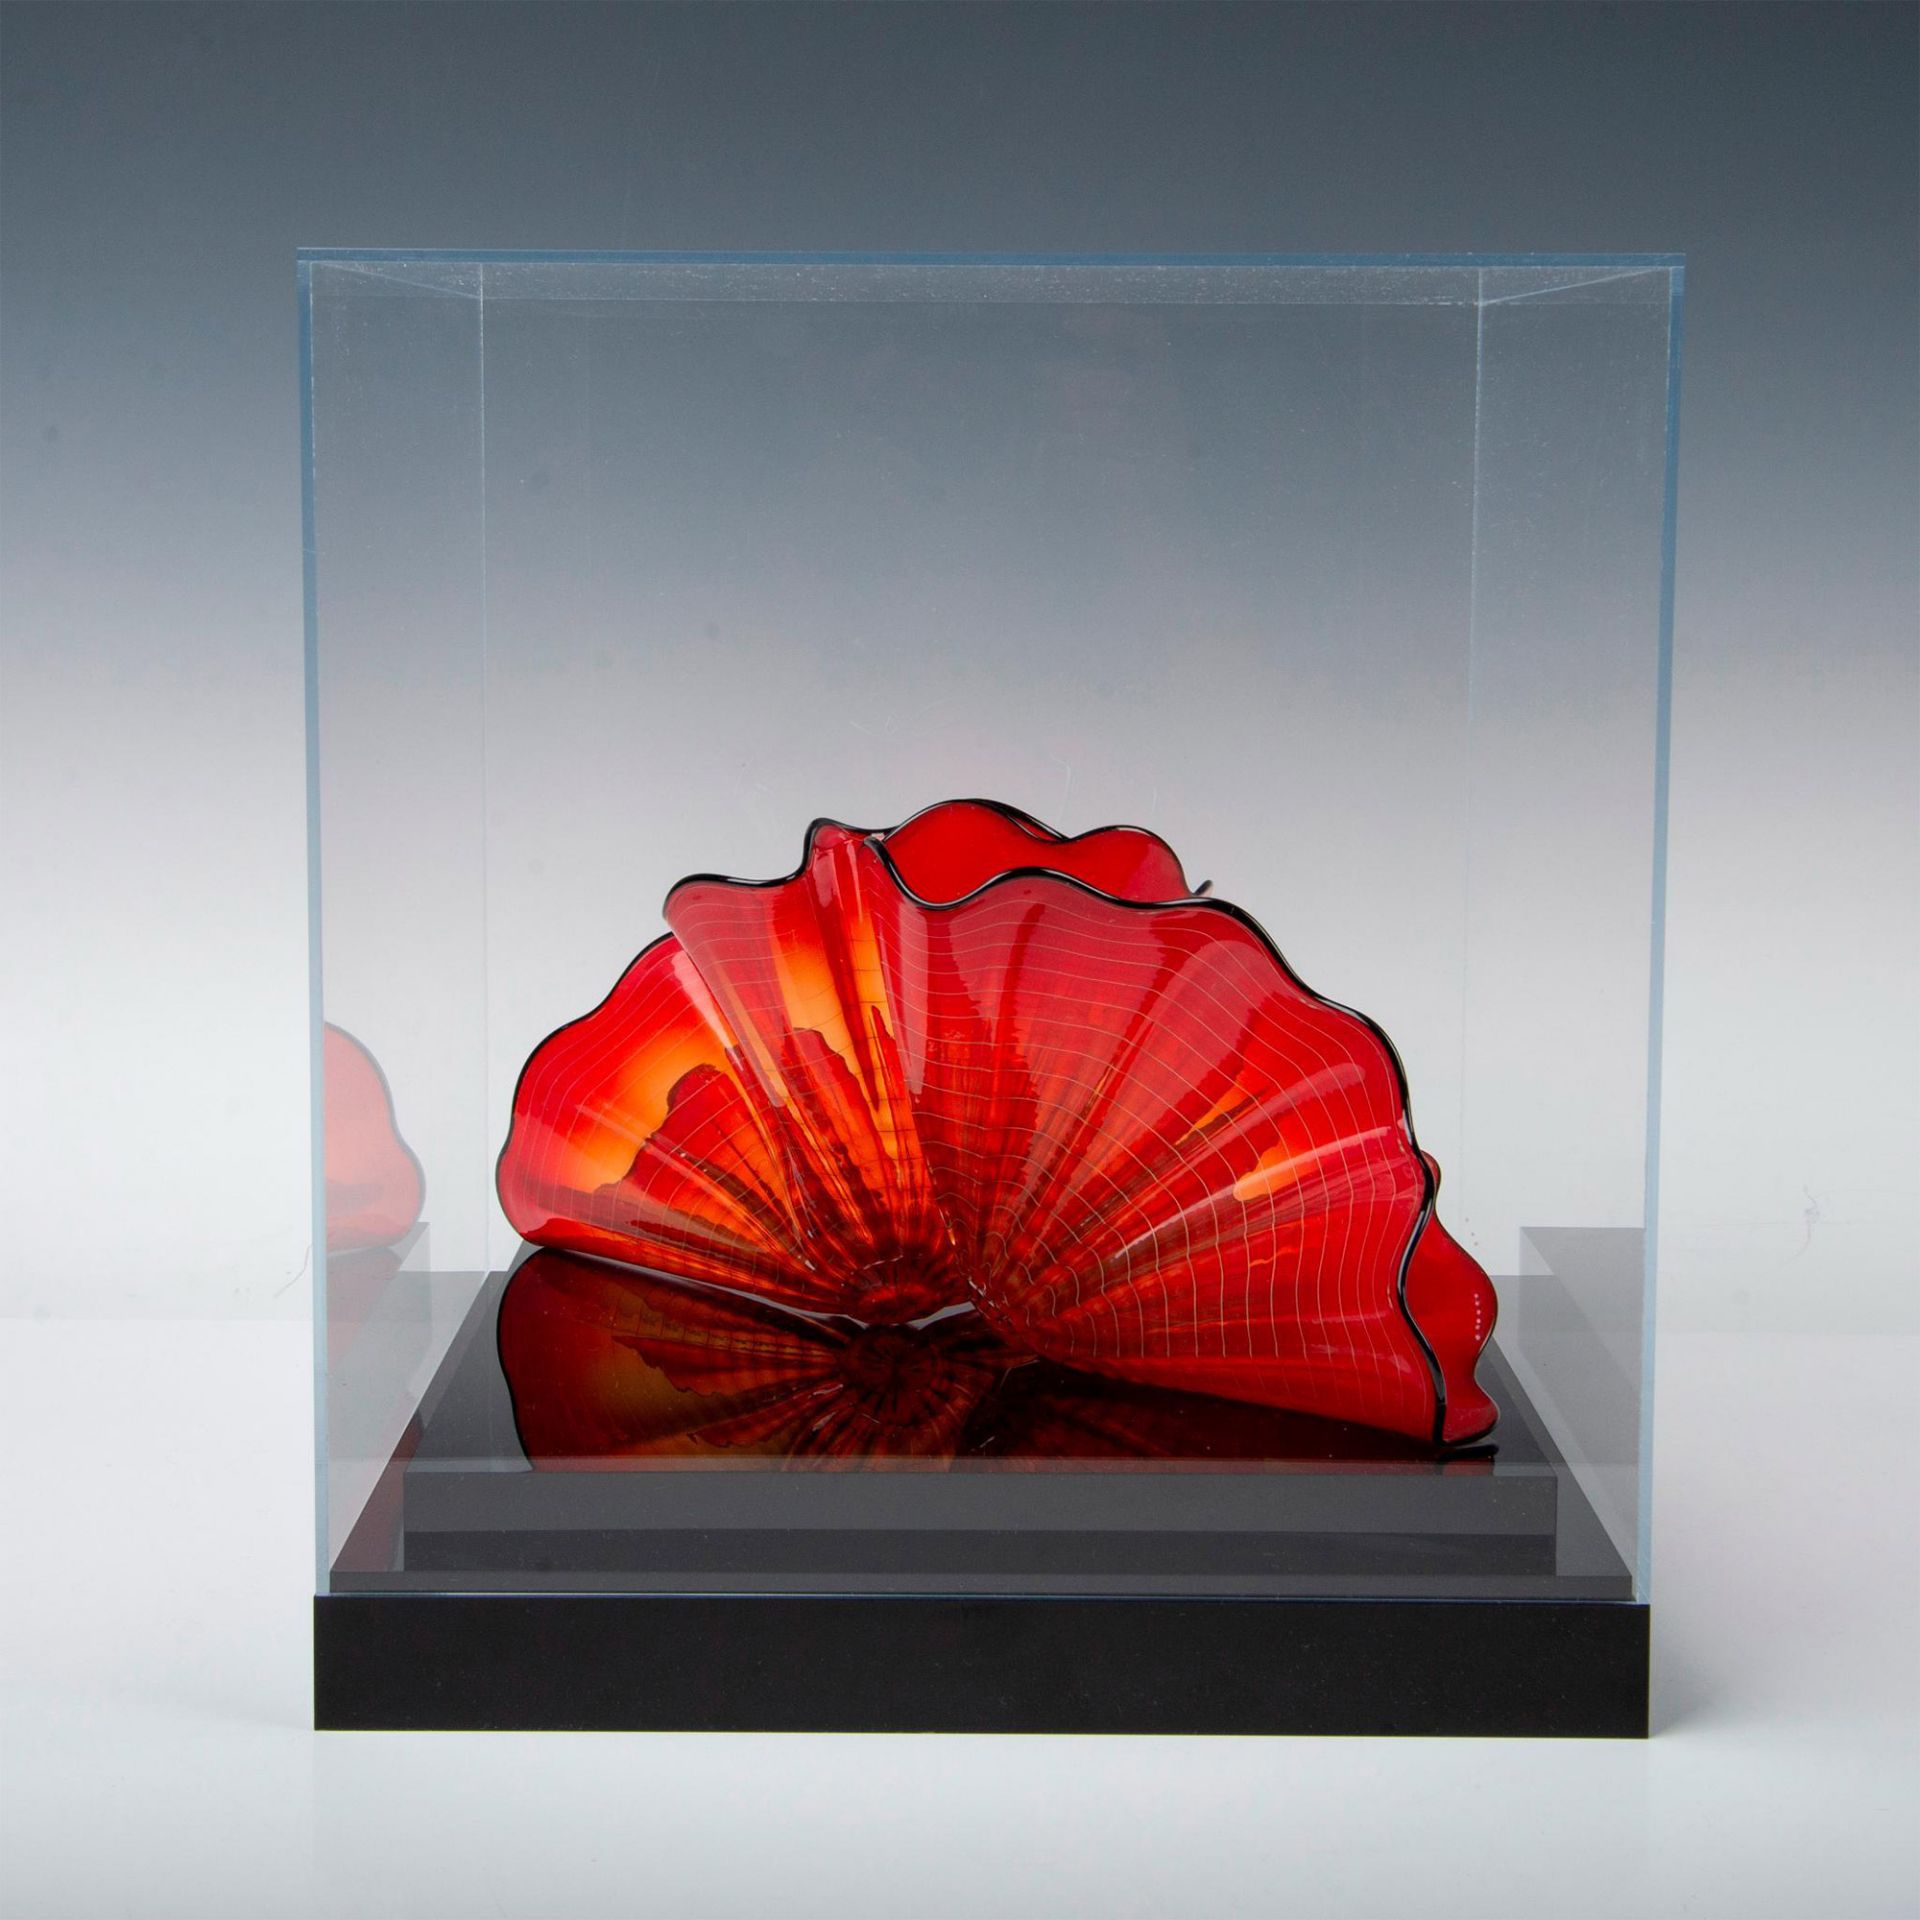 Dale Chihuly Portland Press Art Glass, Red Amber Persian Pair - Image 4 of 20